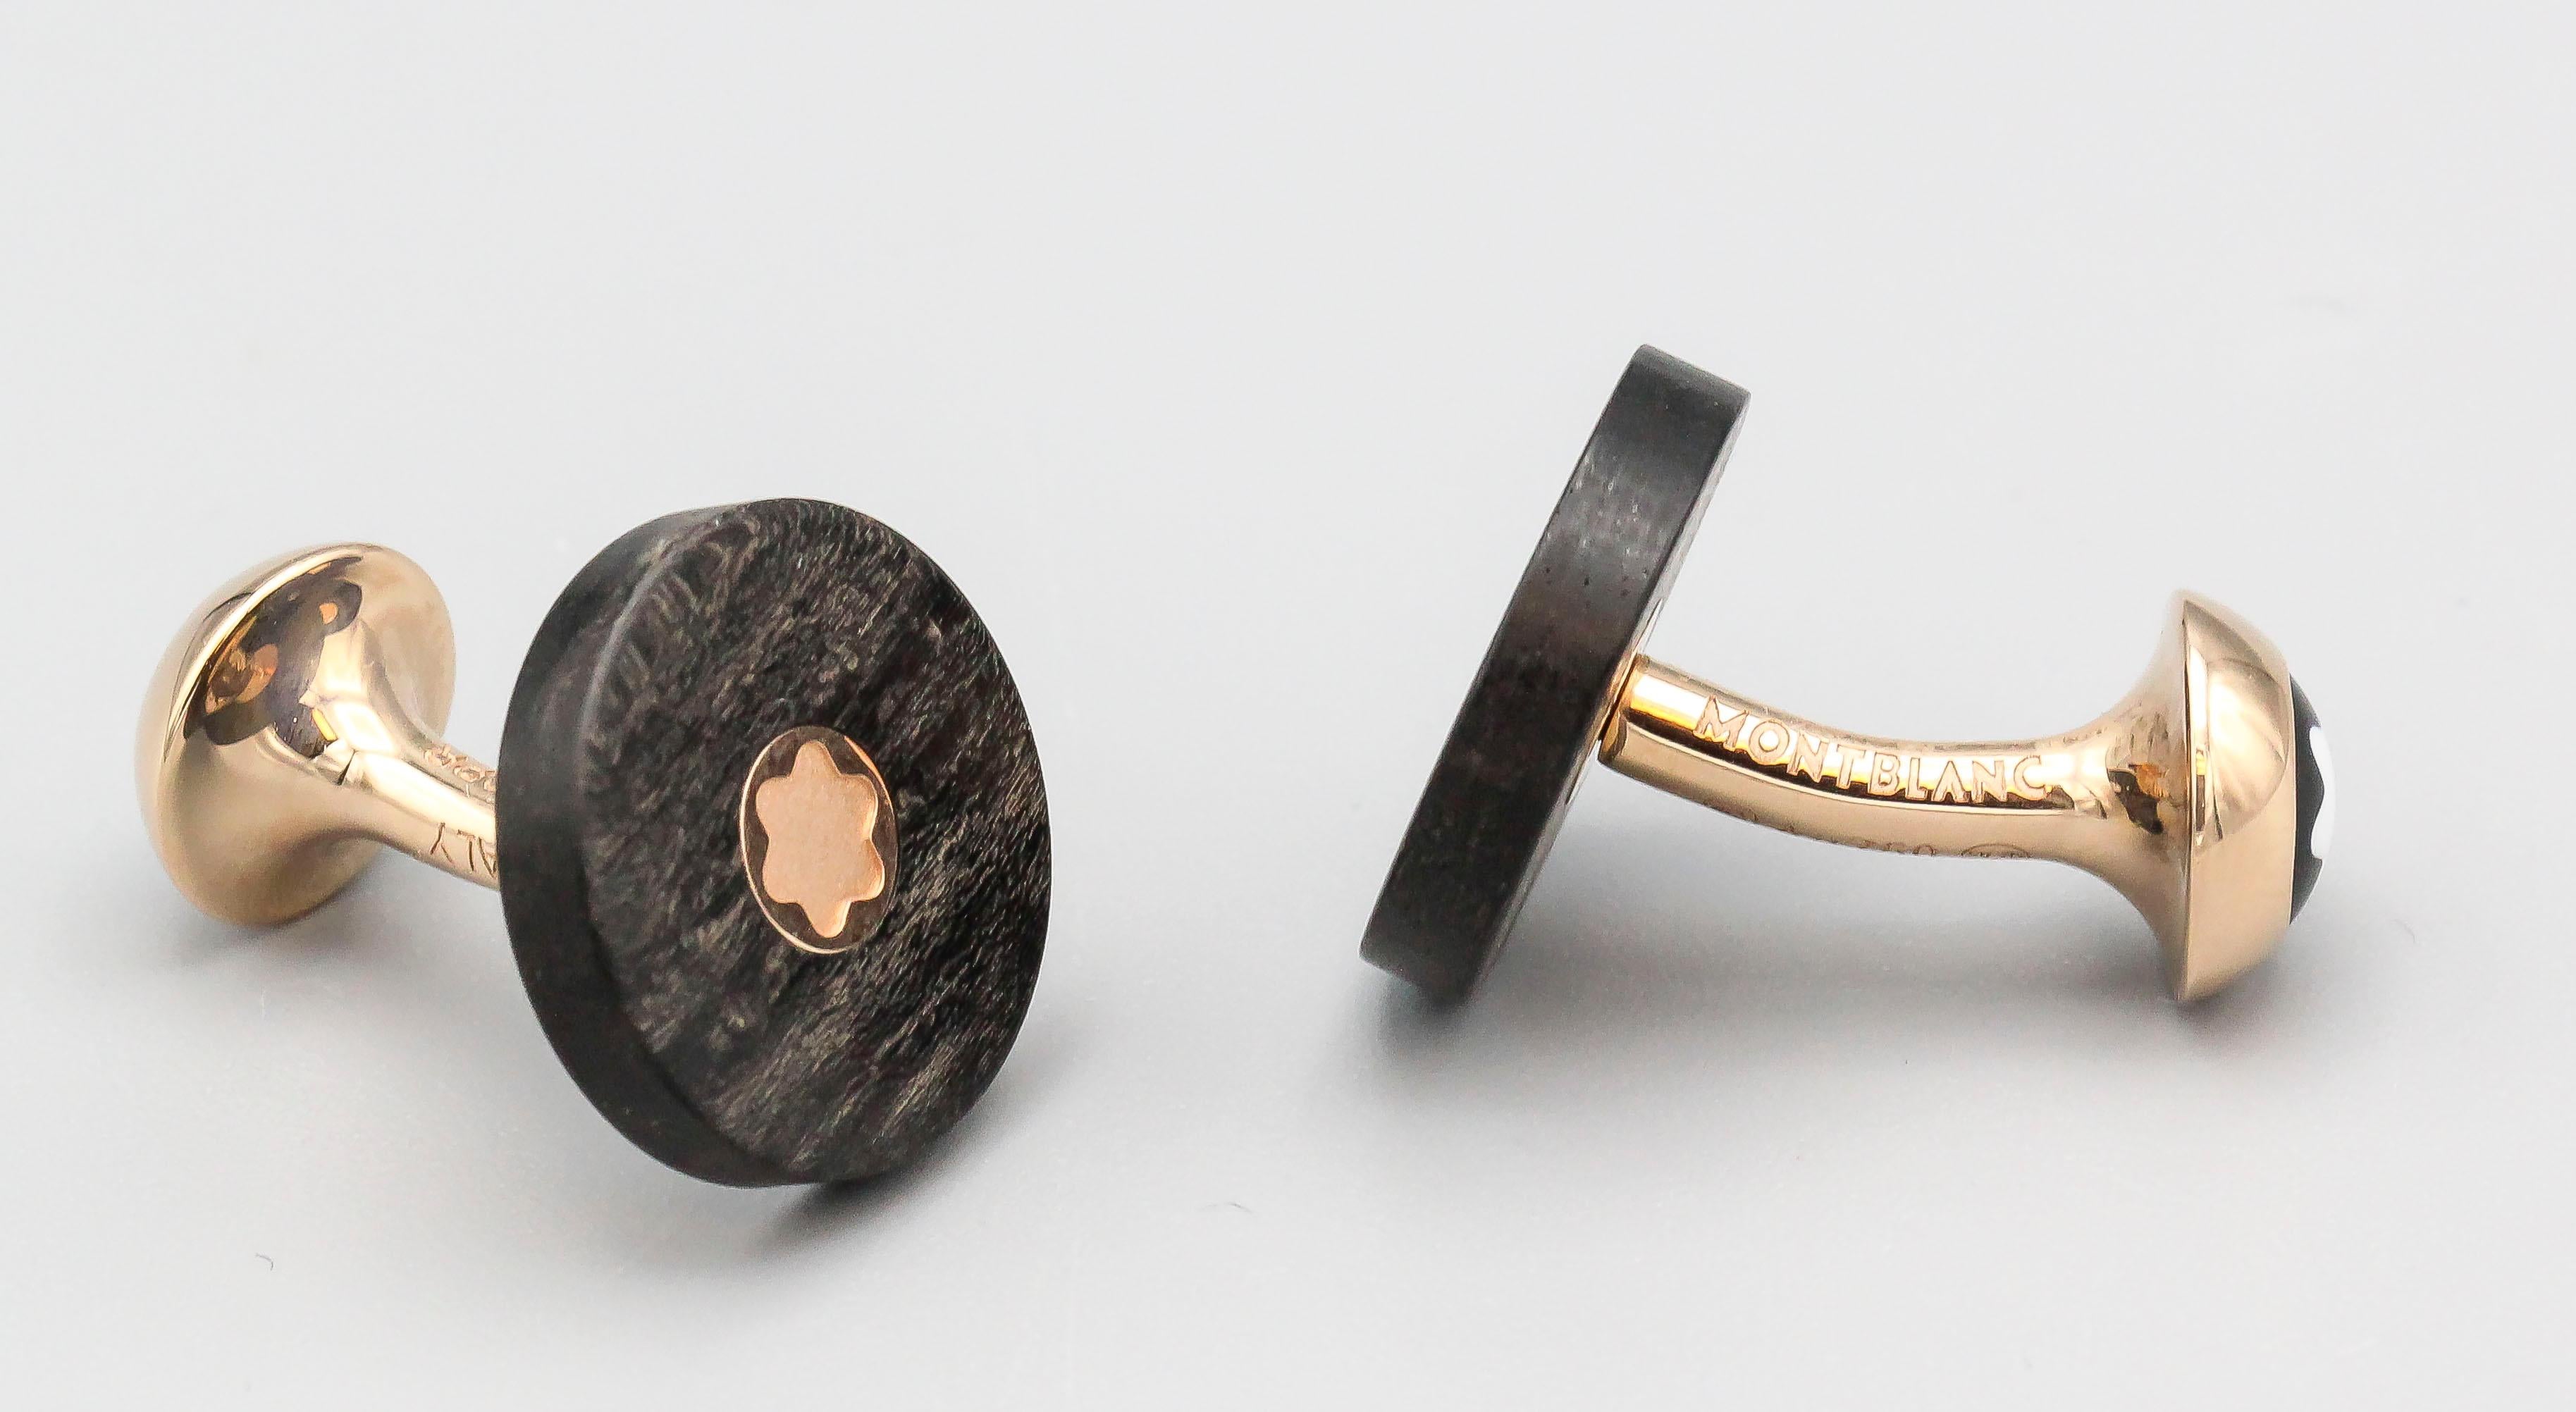 Fine pair of wood and 18k rose gold cufflinks by Montblanc. The front of the cufflinks features a polished wood disc with the gold Montblanc signature six point star, while the opposite end of the cufflinks feature the classic six point star in